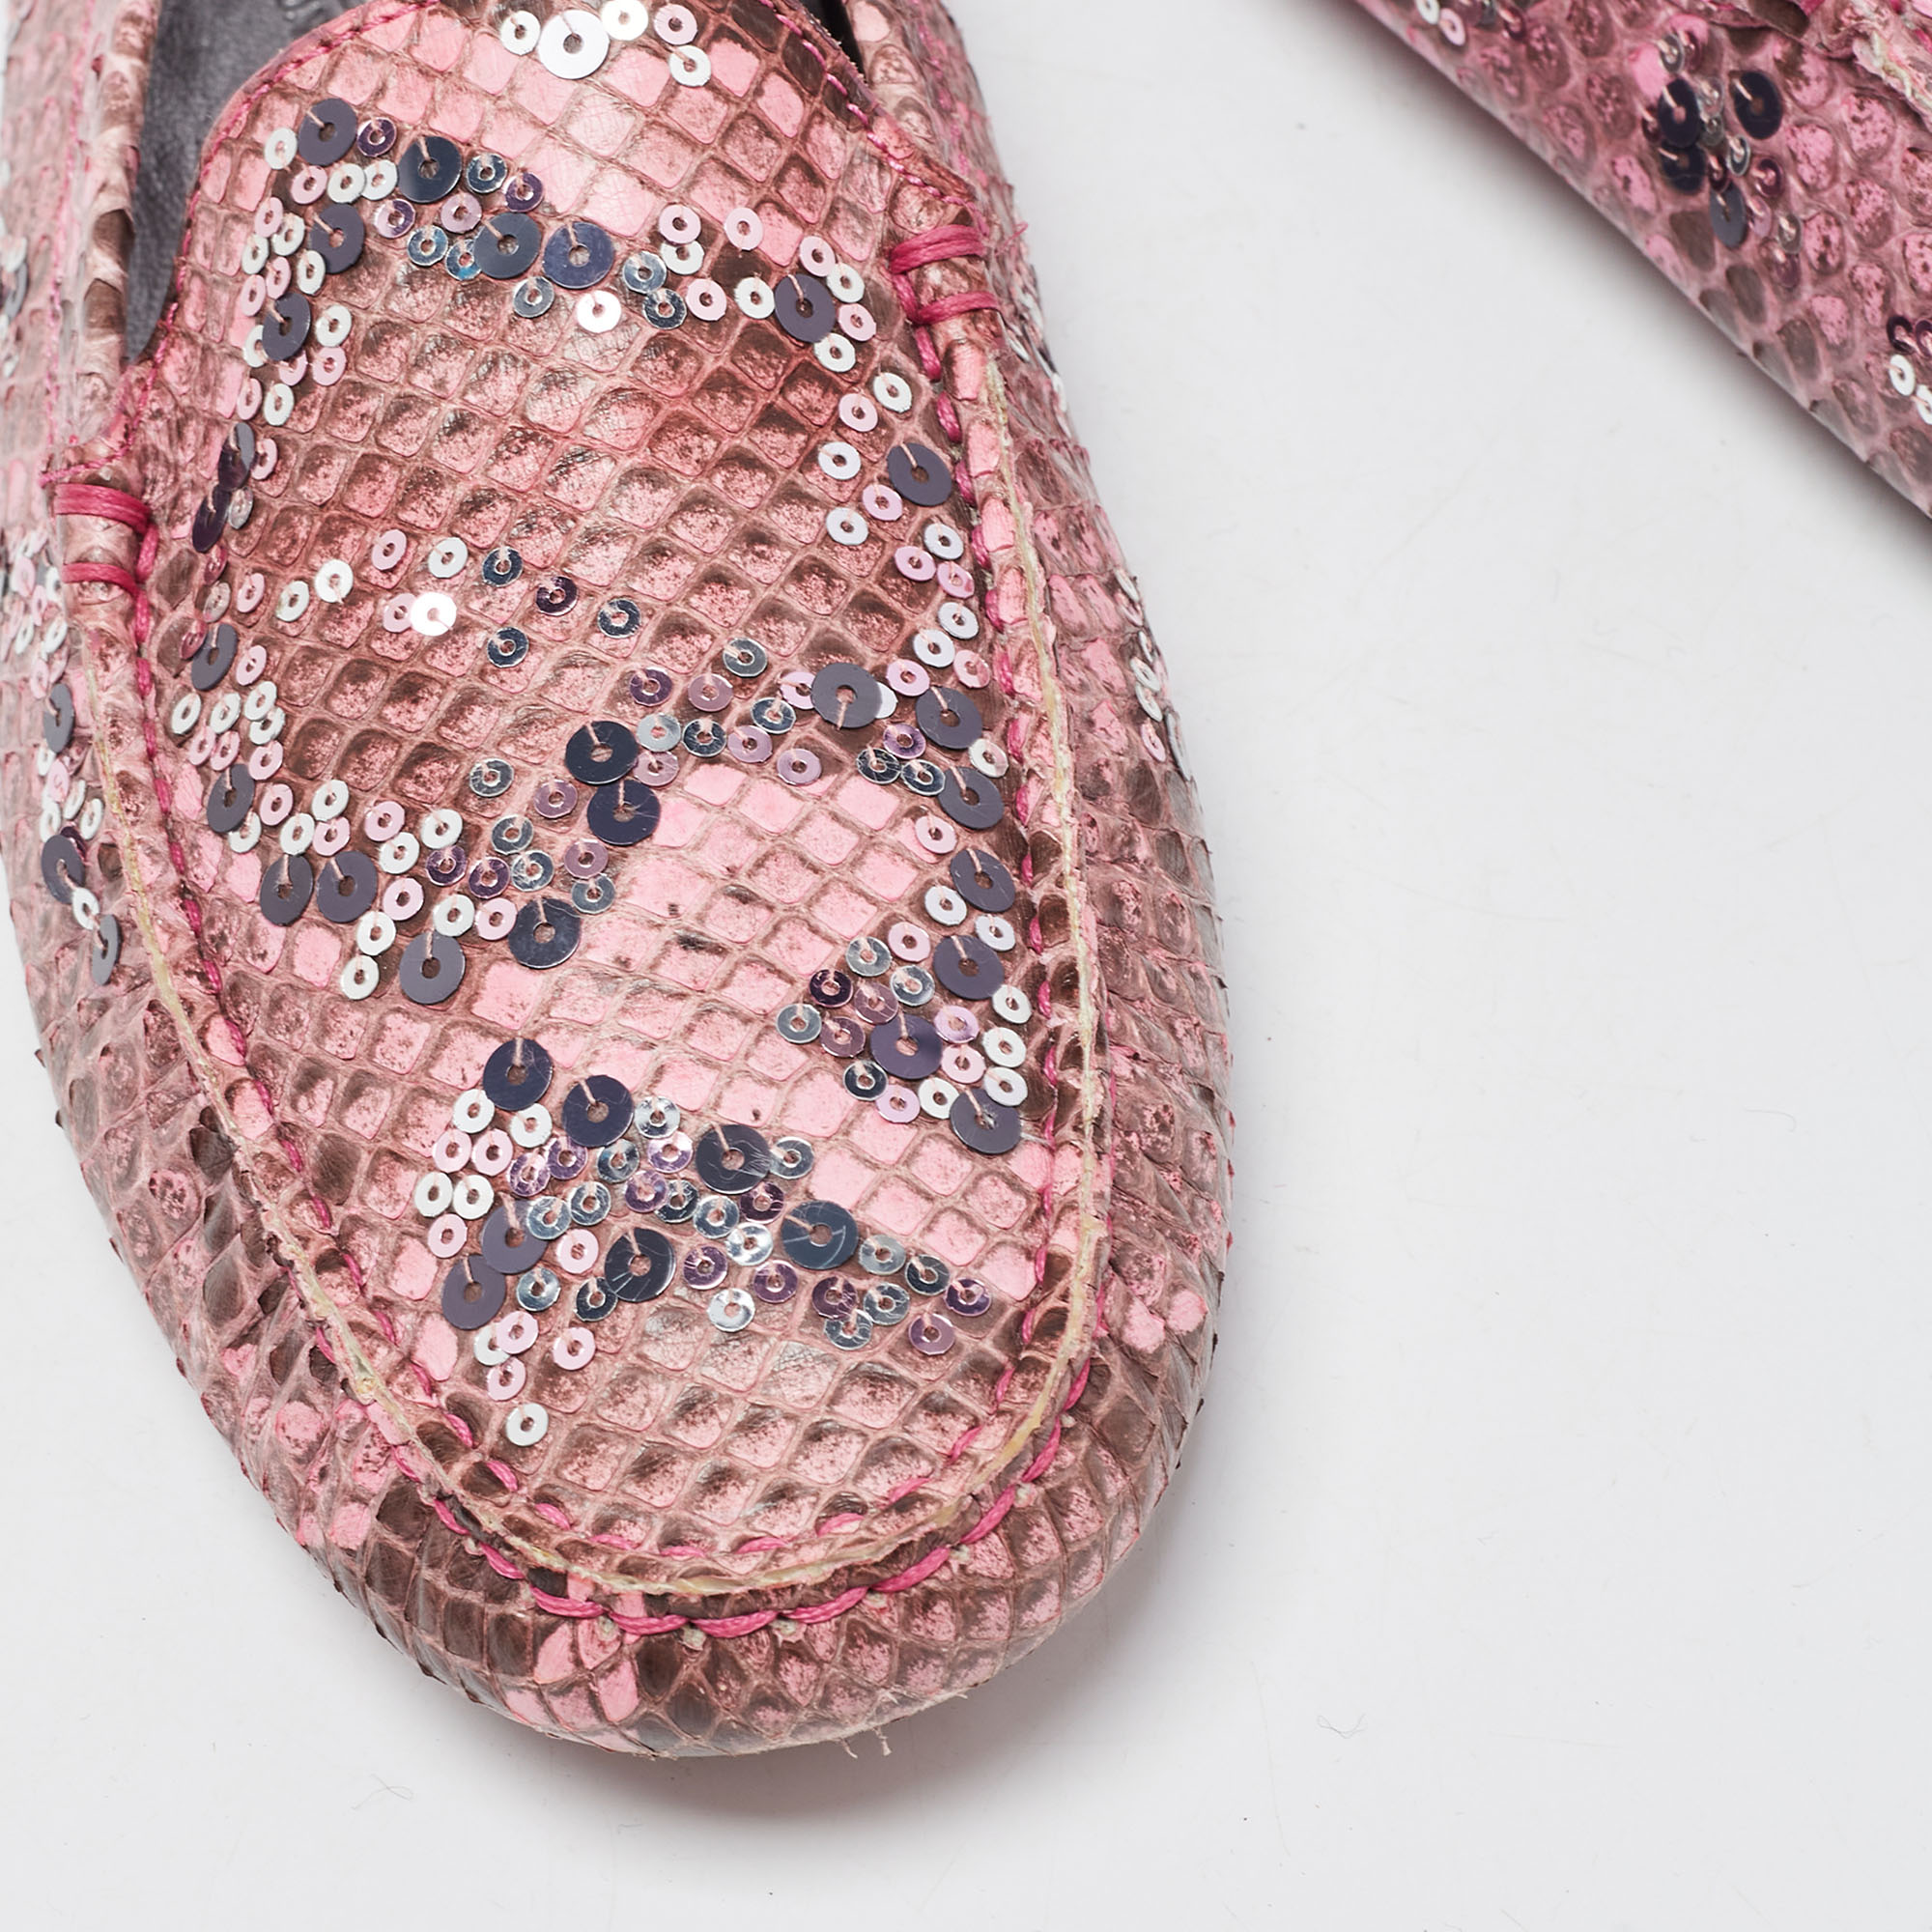 Tod's Pink Python Leather Embellished Loafers Size 37